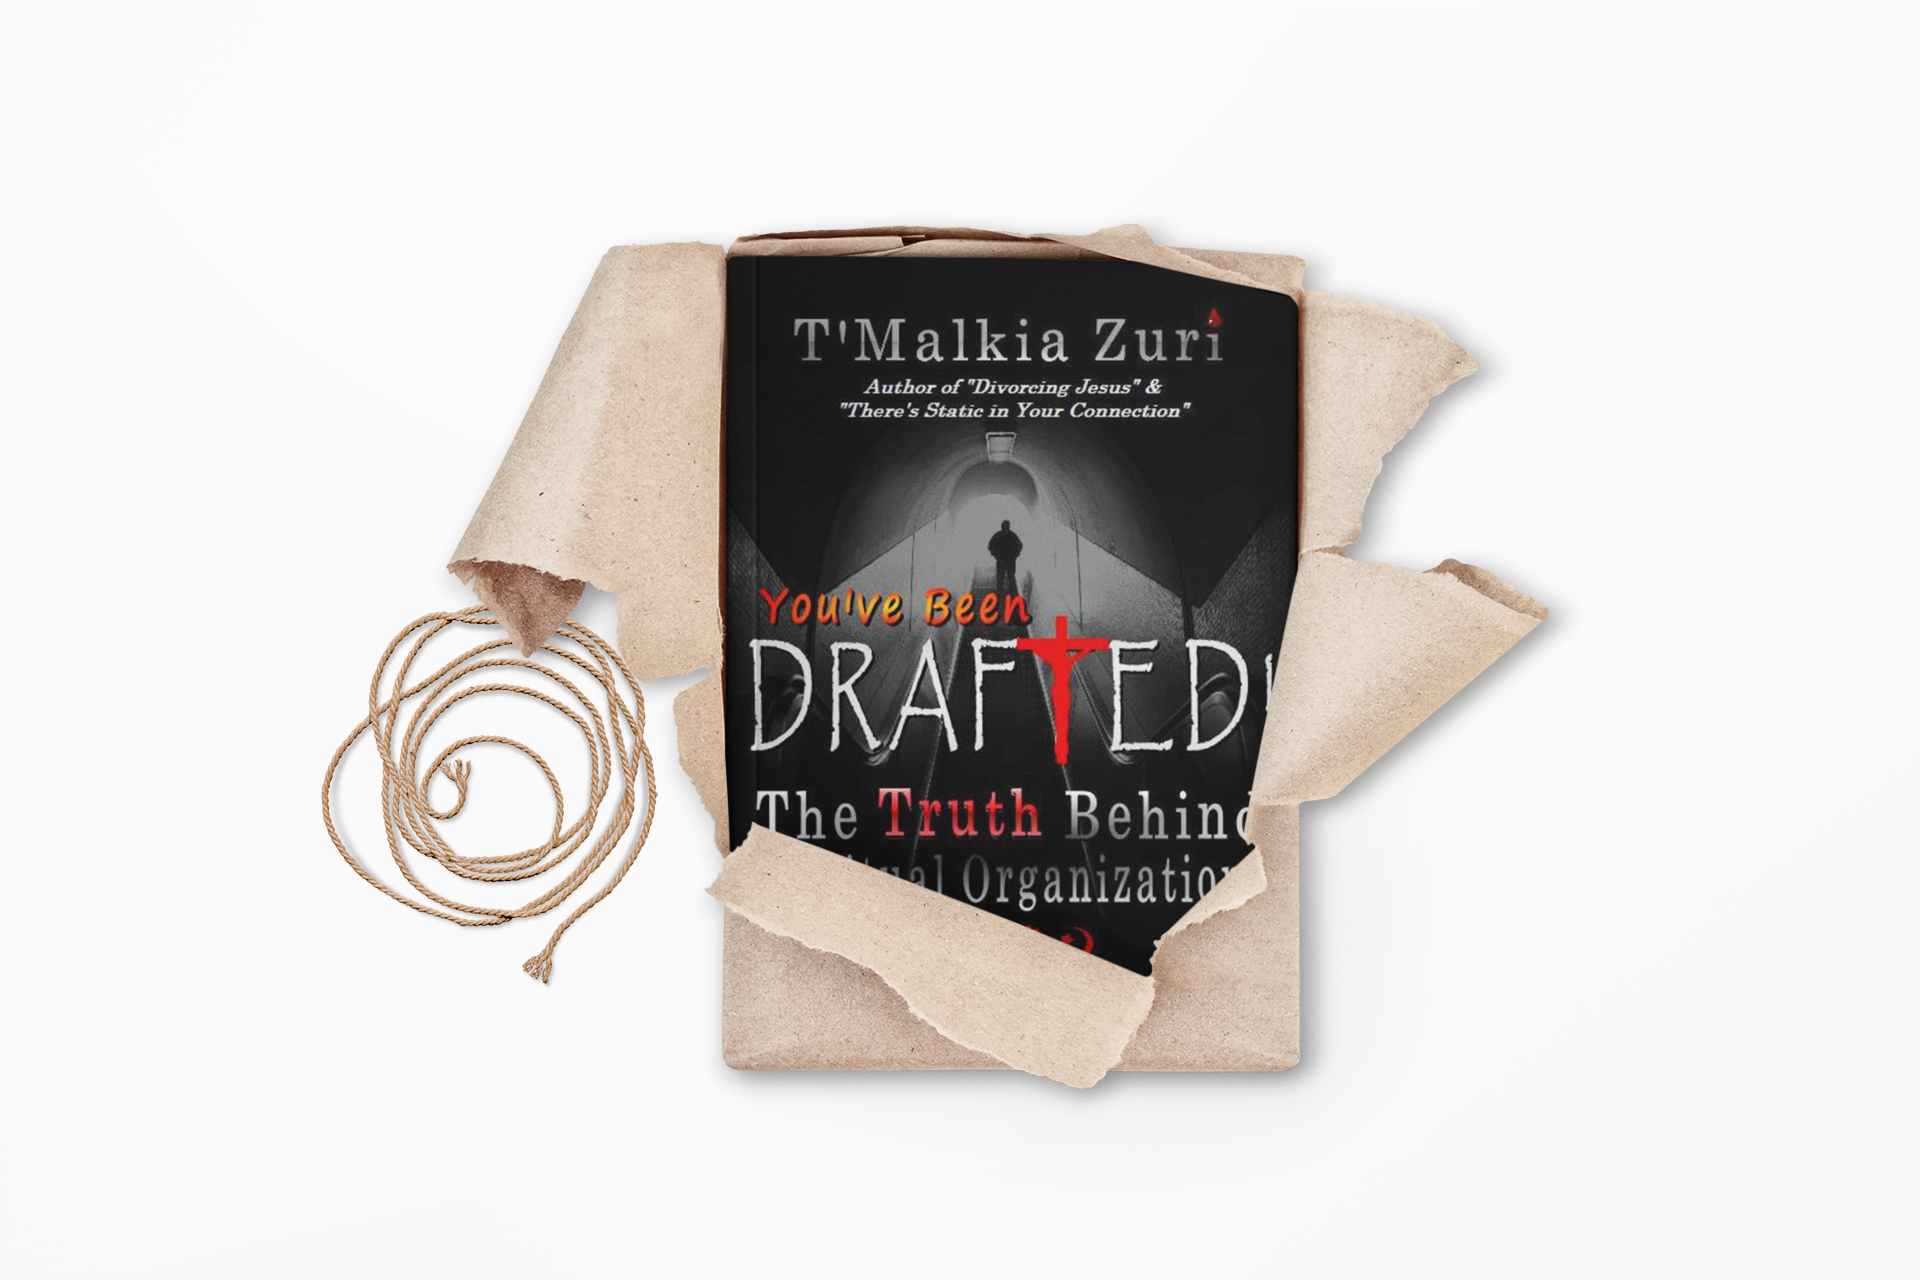 You've Been Drafted! The Truth Behind Spiritual Organizations